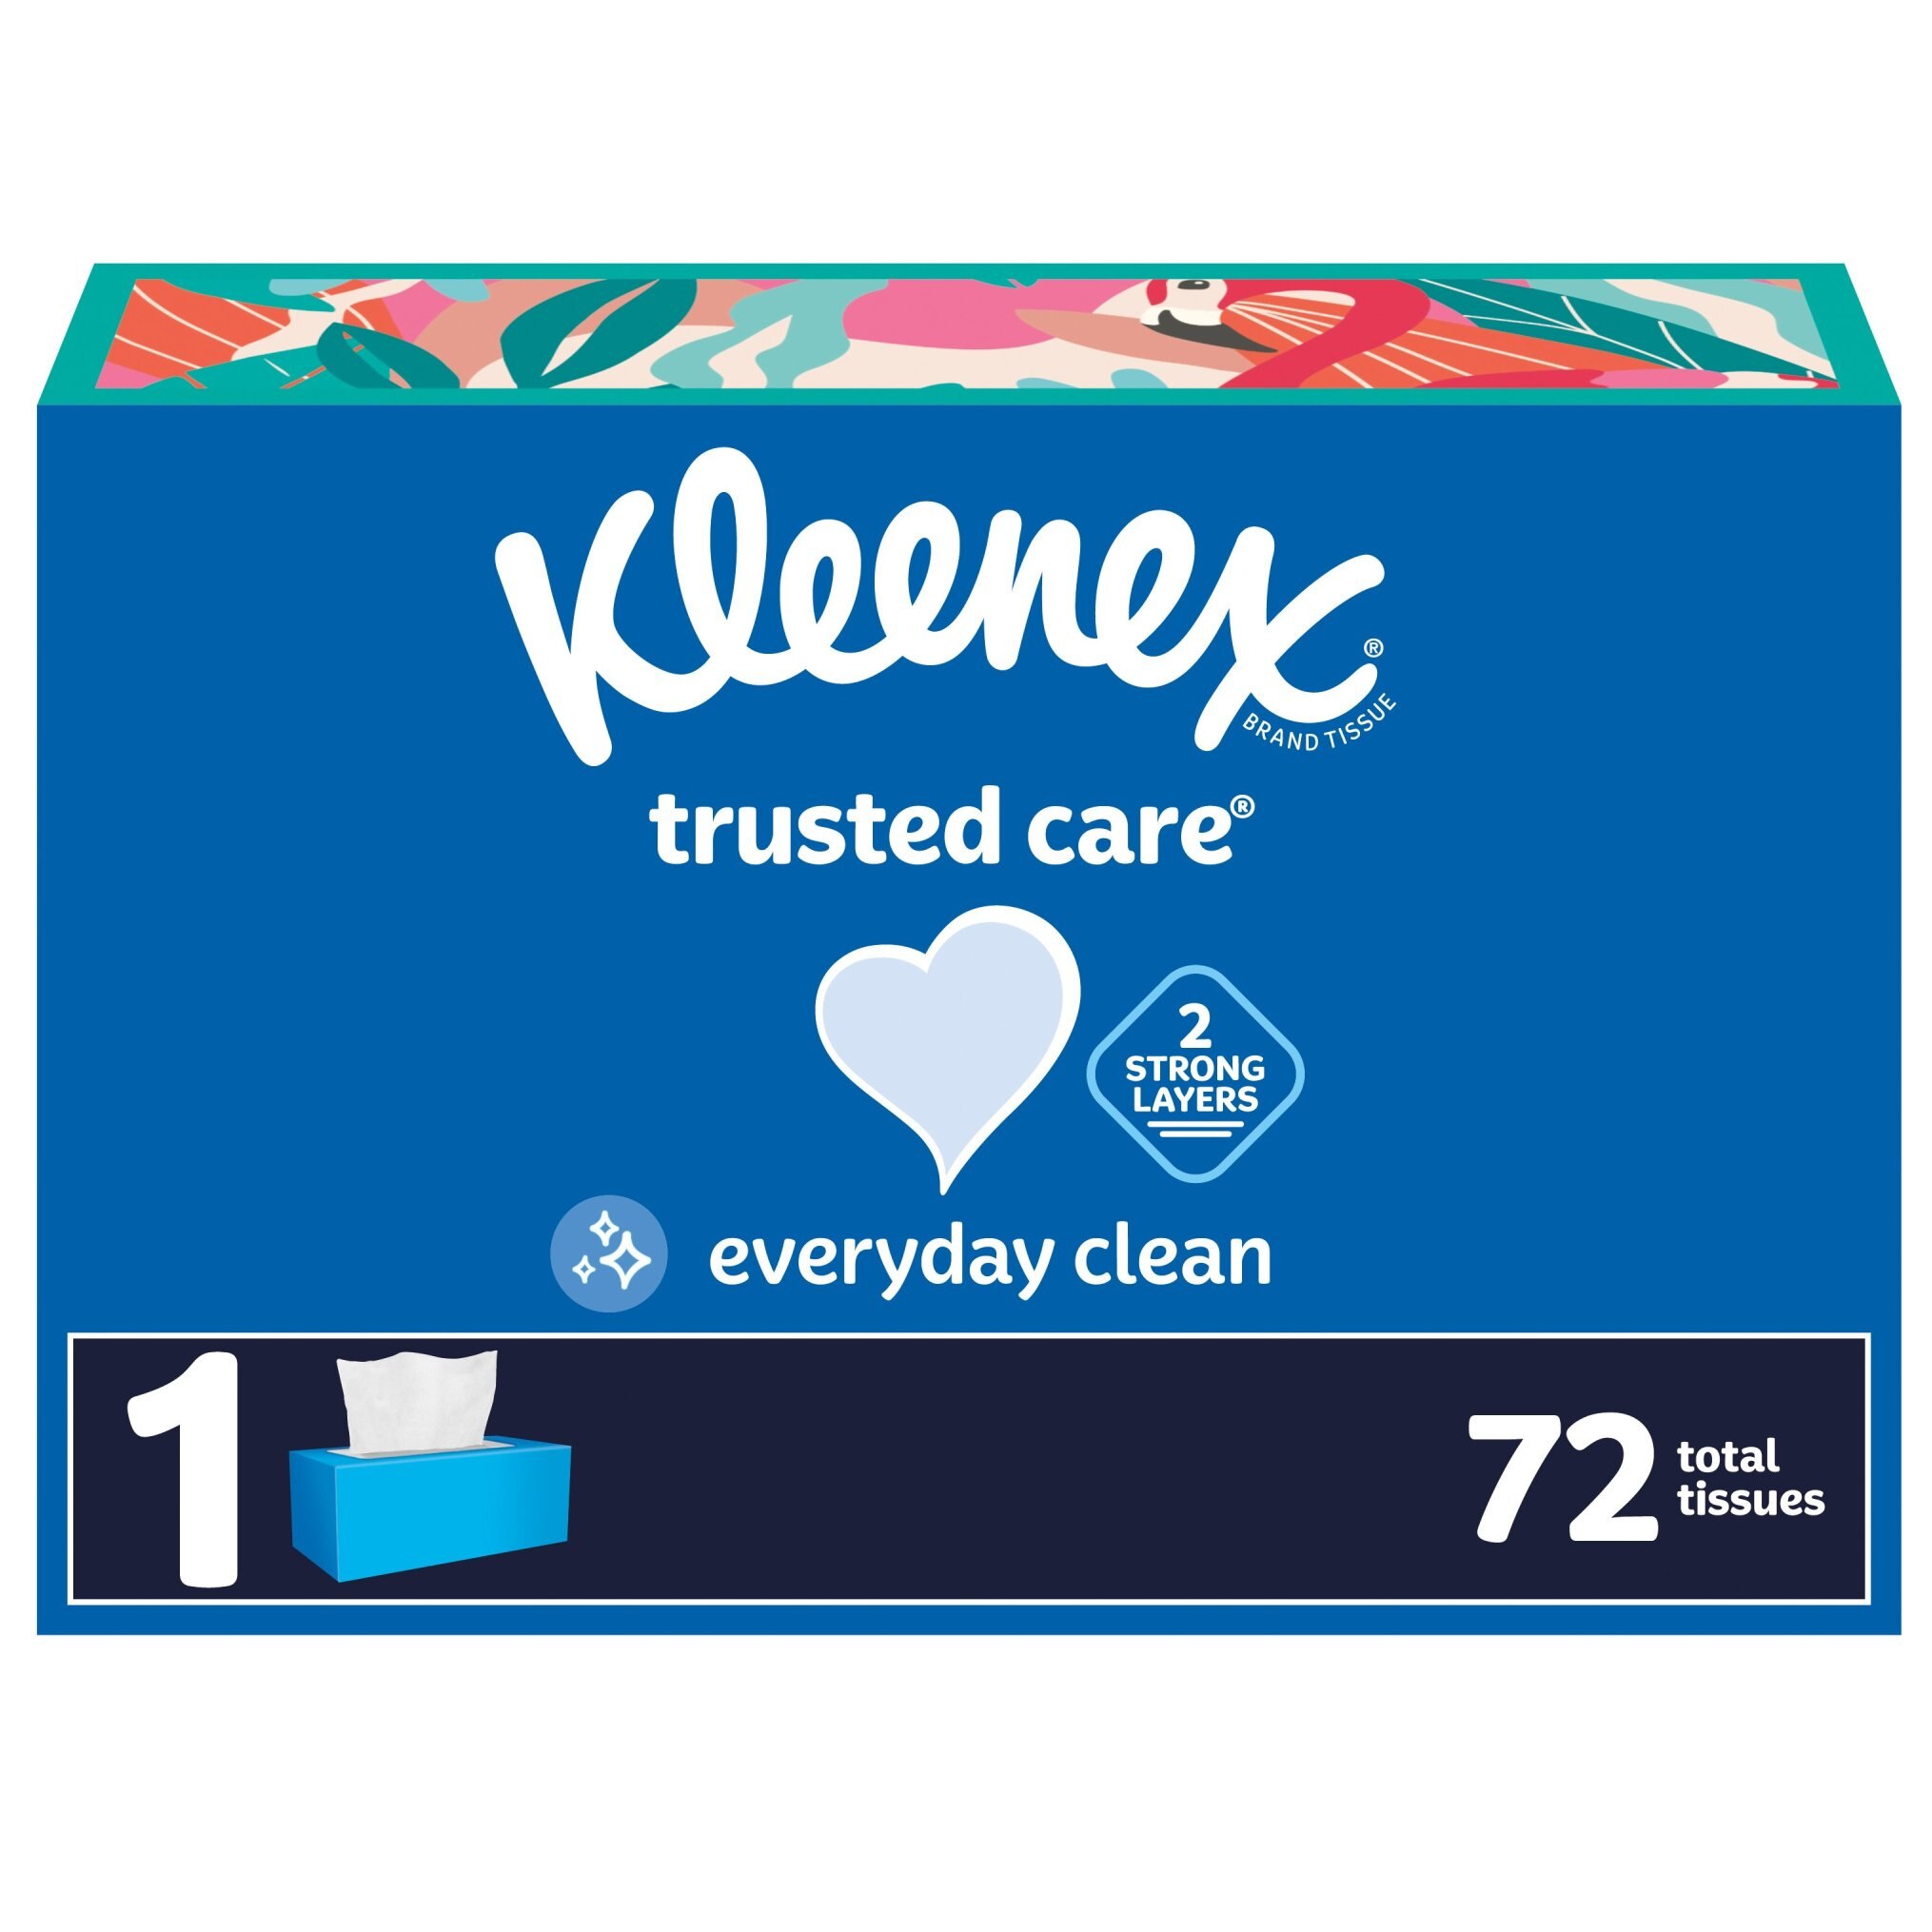 Kleenex Trusted Care Facial Tissues, 1 Flat Box, 72 Tissues per Box, 2-Ply (72 Total Tissues)